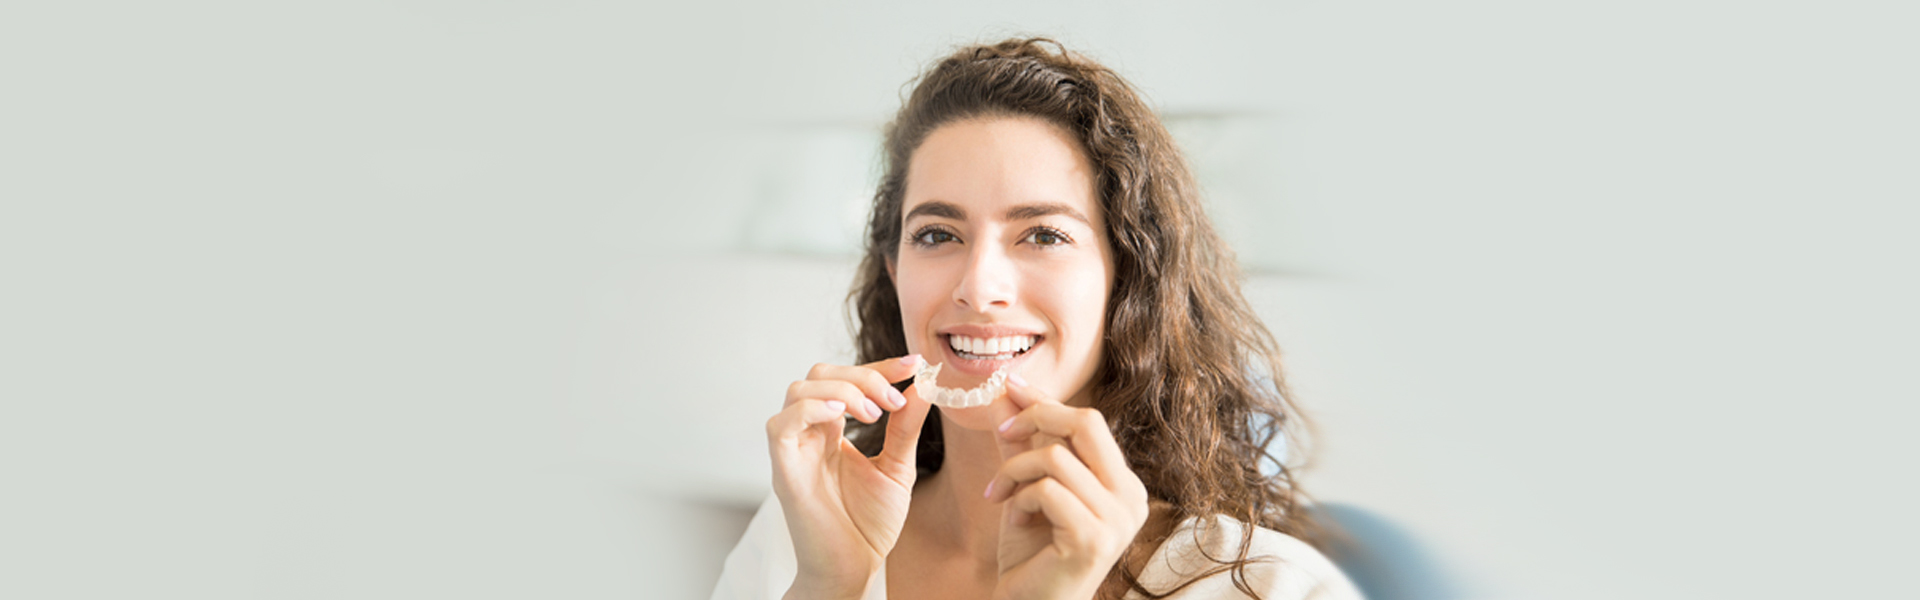 Mastering Mealtime: How to Eat Comfortably with Clear Aligners